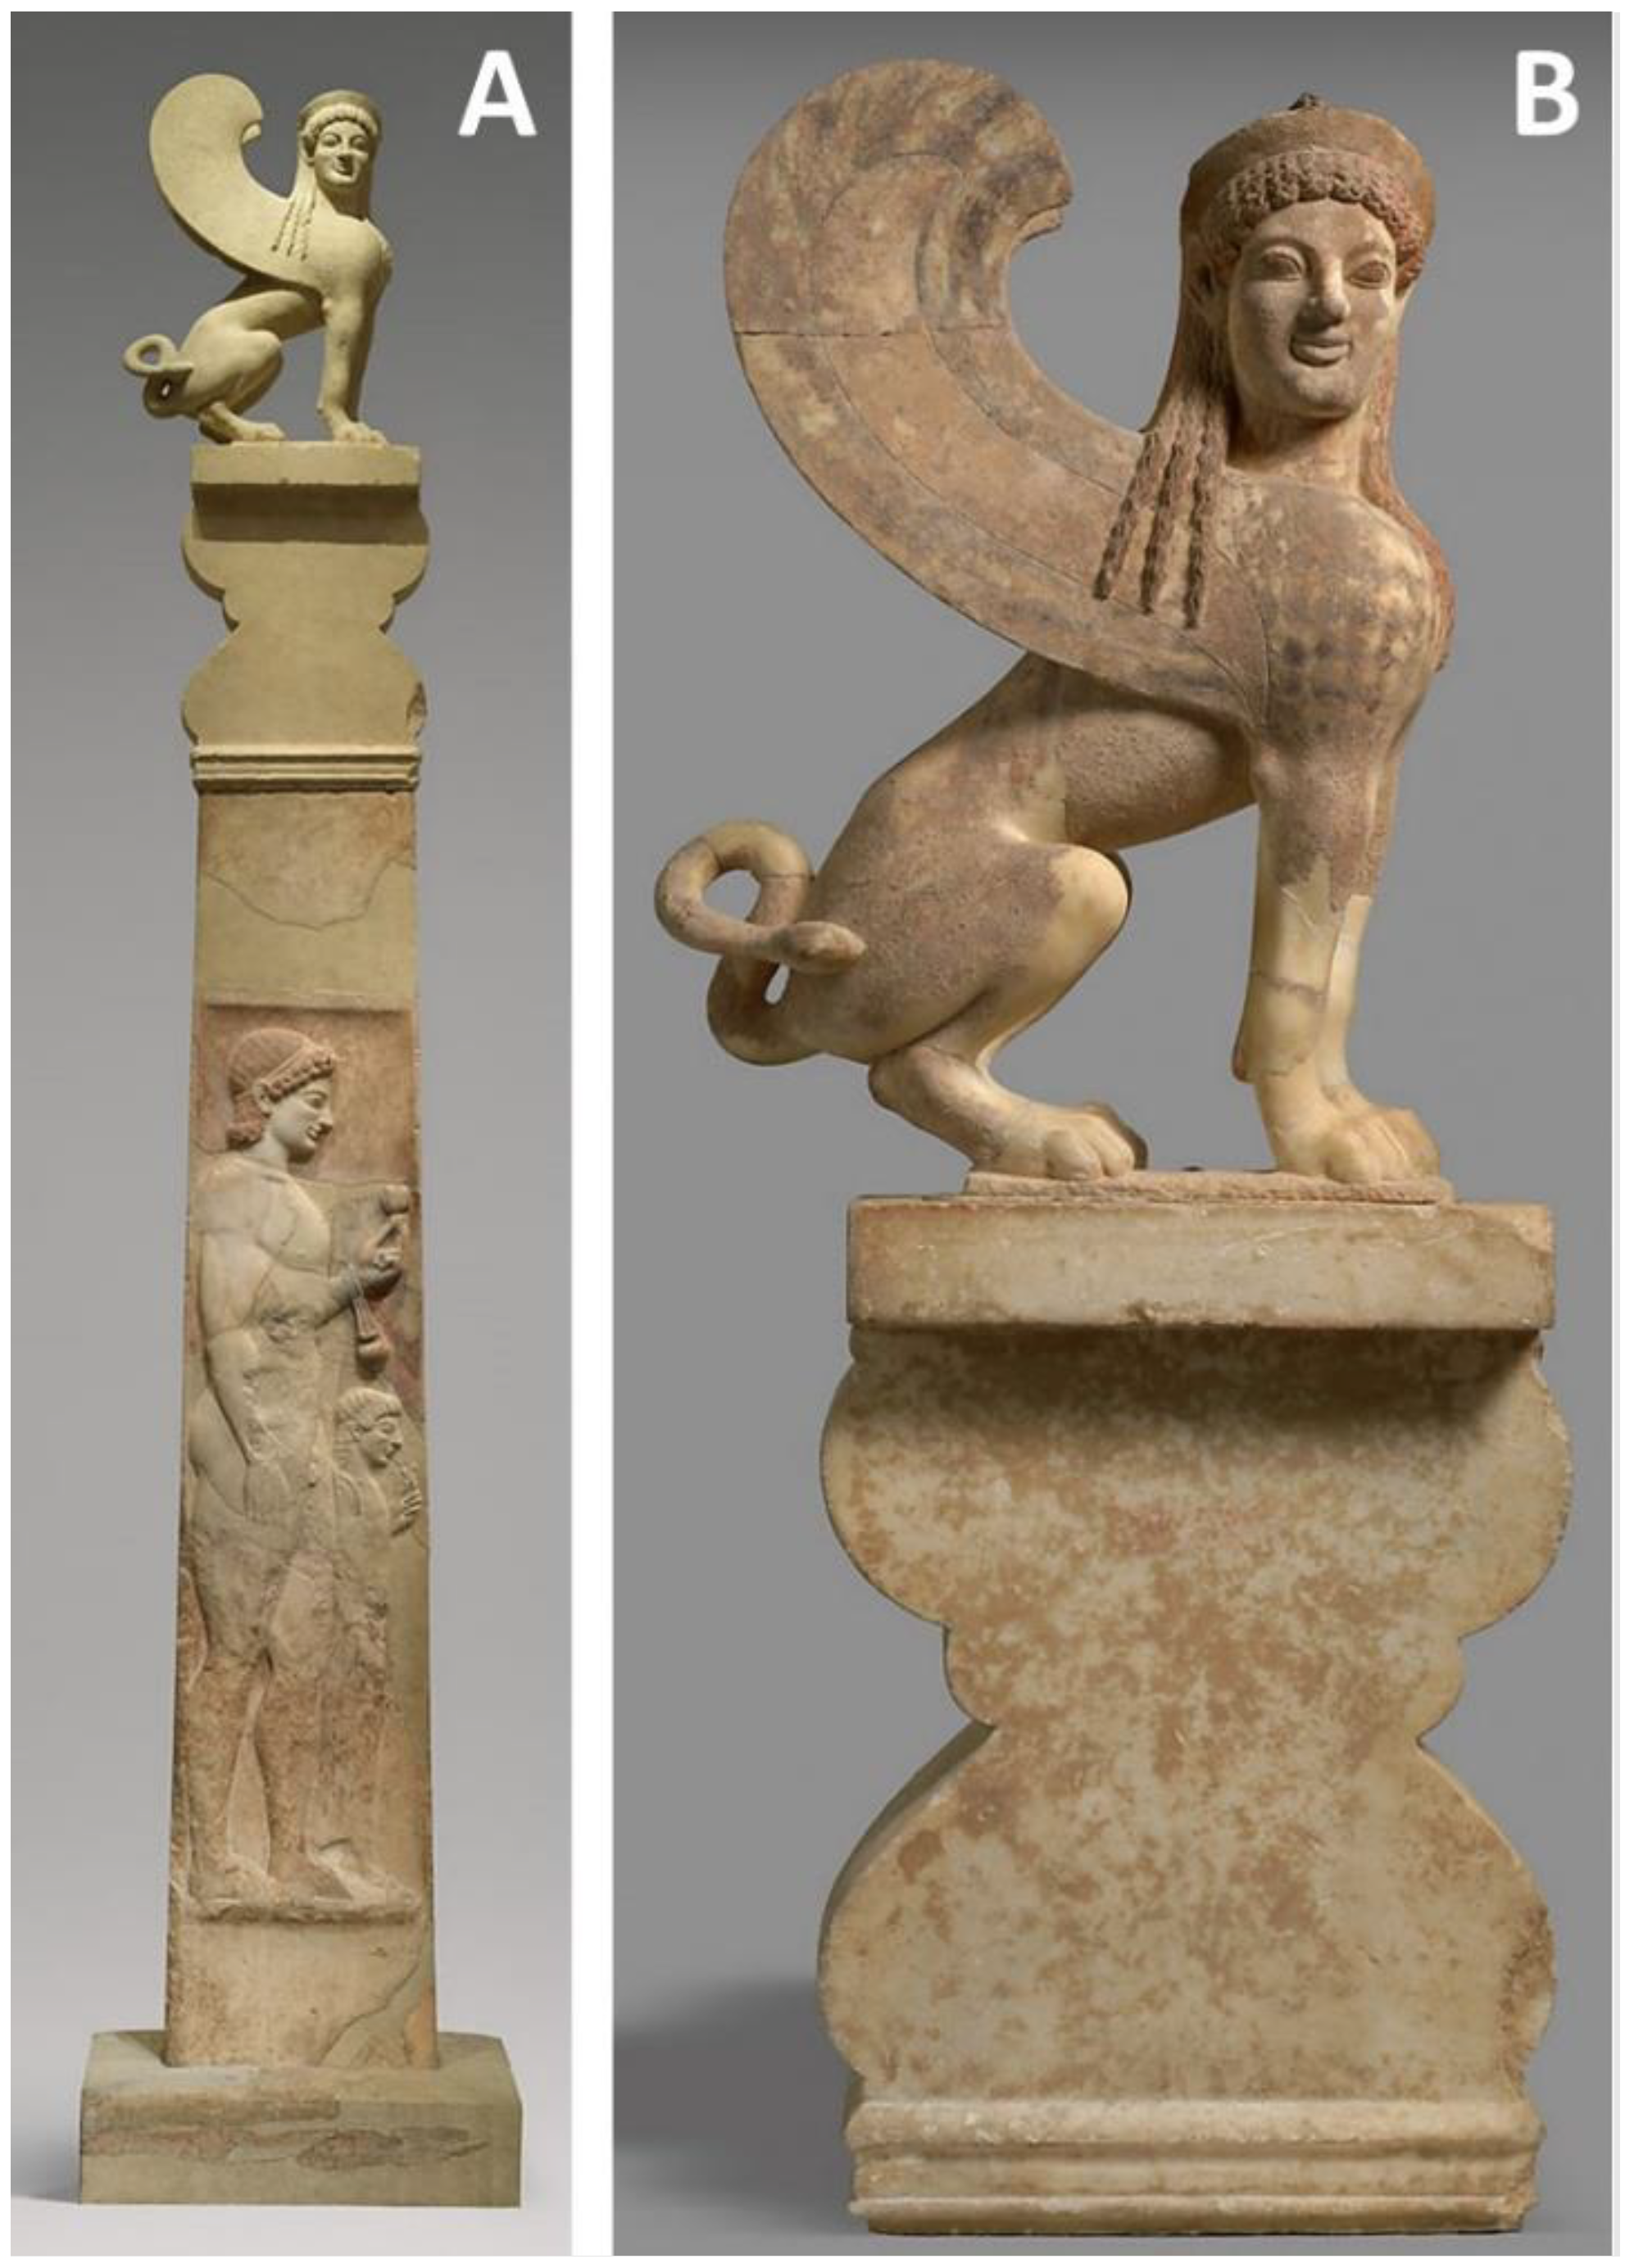 Applied Sciences | Free Full-Text | Polychromy in Ancient Greek Sculpture:  New Scientific Research on an Attic Funerary Stele at the Metropolitan  Museum of Art